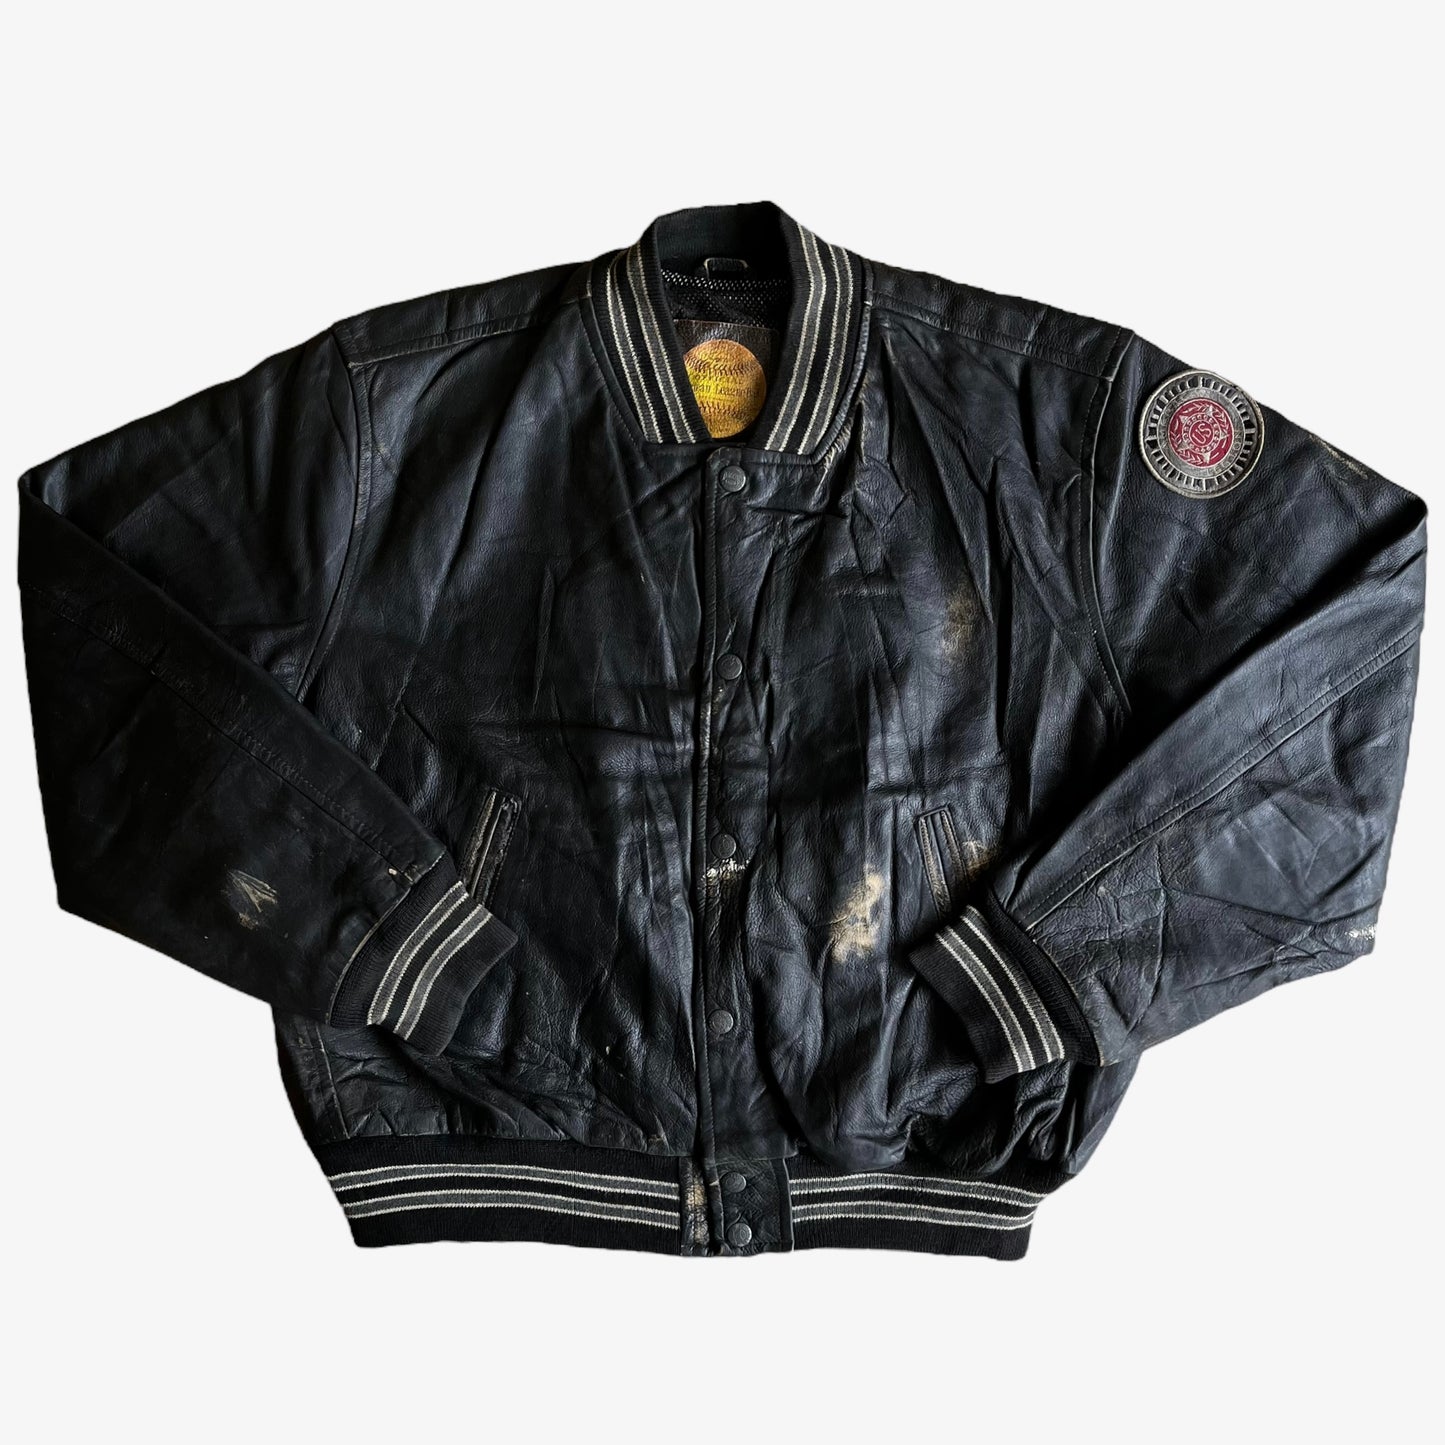 Vintage 90s Redskins Black Leather Varsity Jacket With Back Spell Out - Casspios Dream